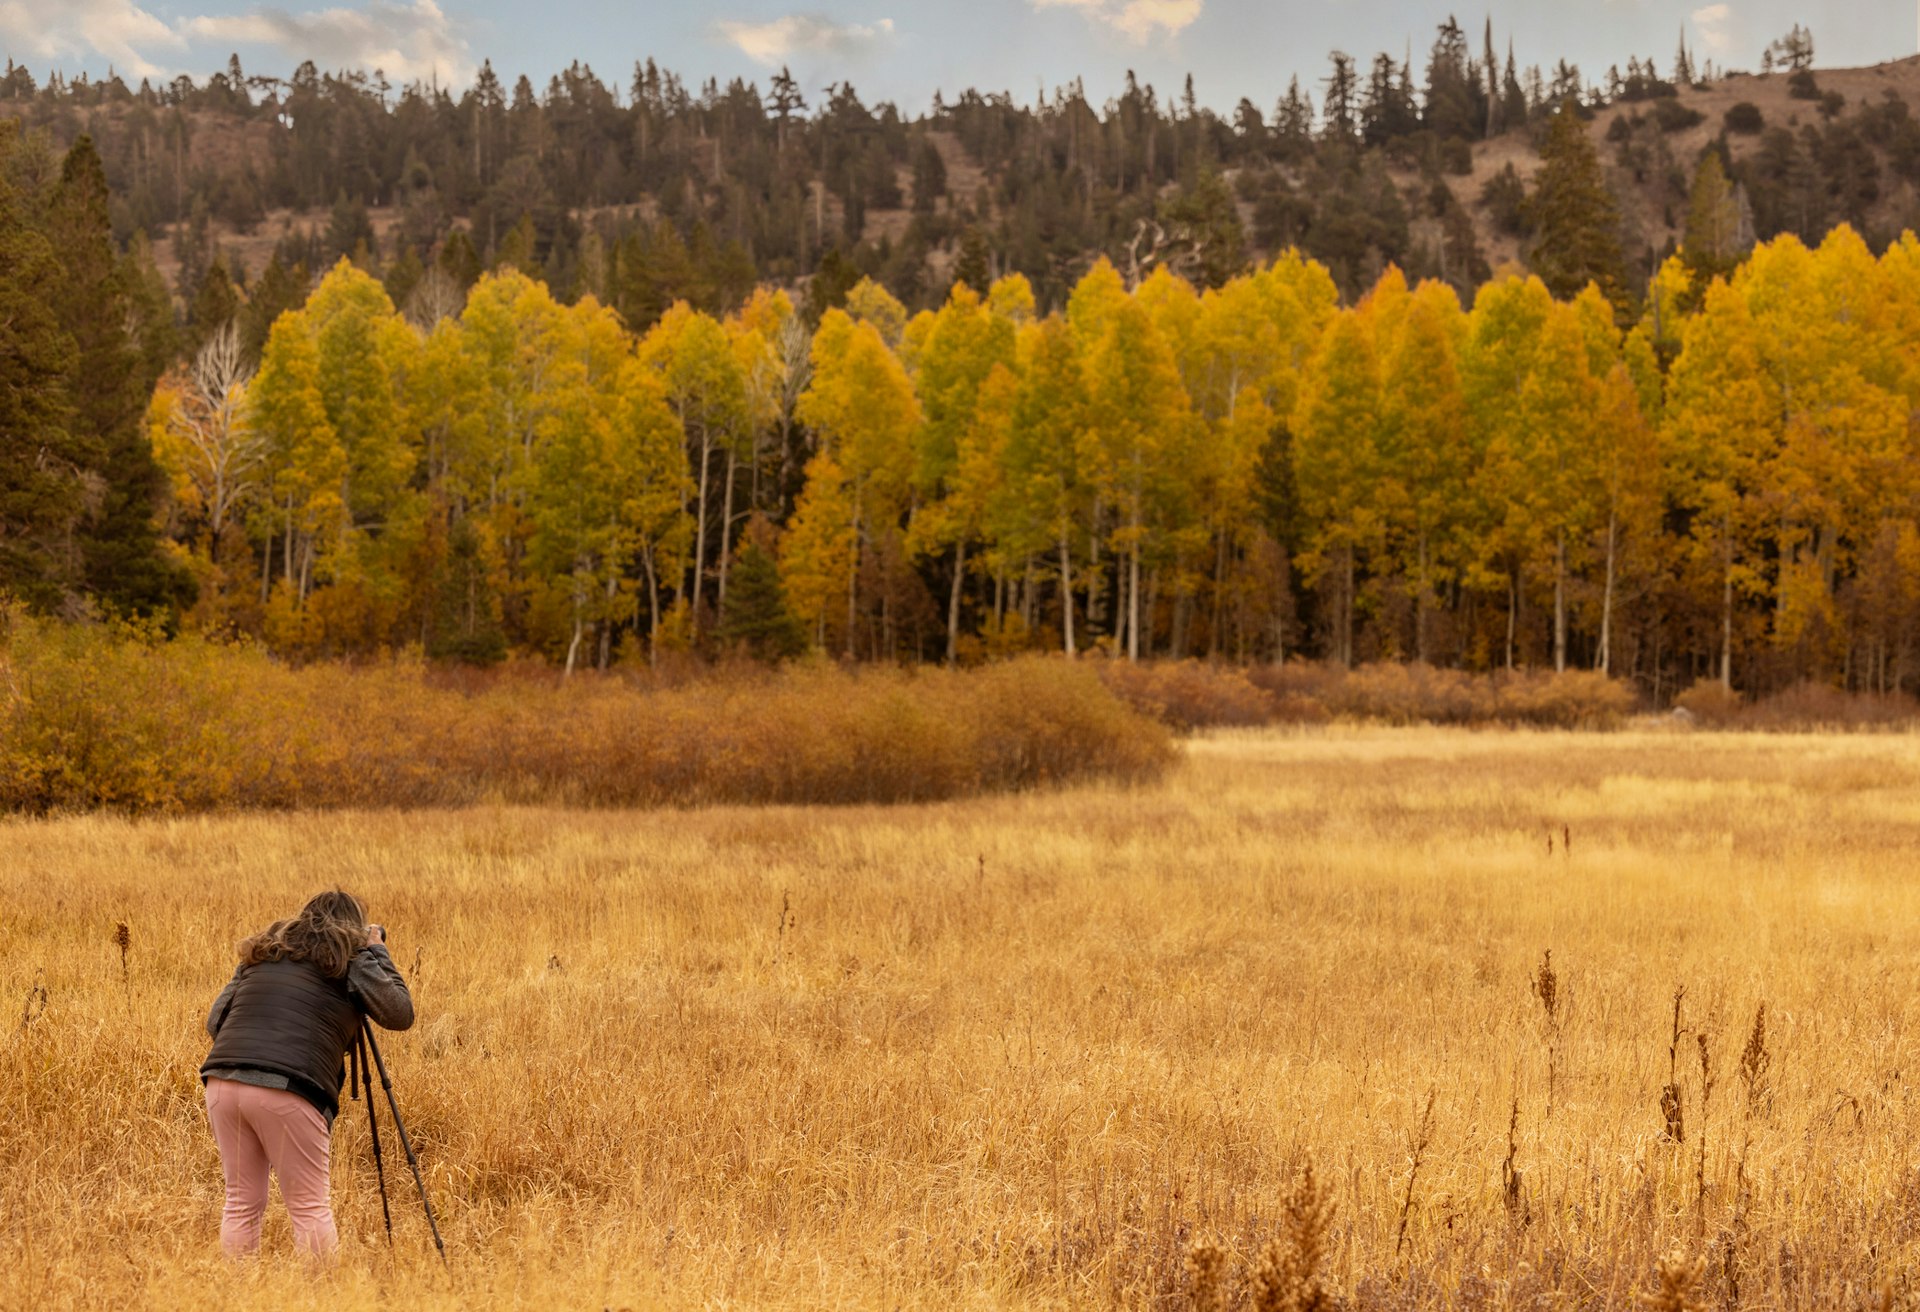 High quality stock photos of woman shooting photos of Autumn colors in the Sierra Nevada mountains in Nevada and California.